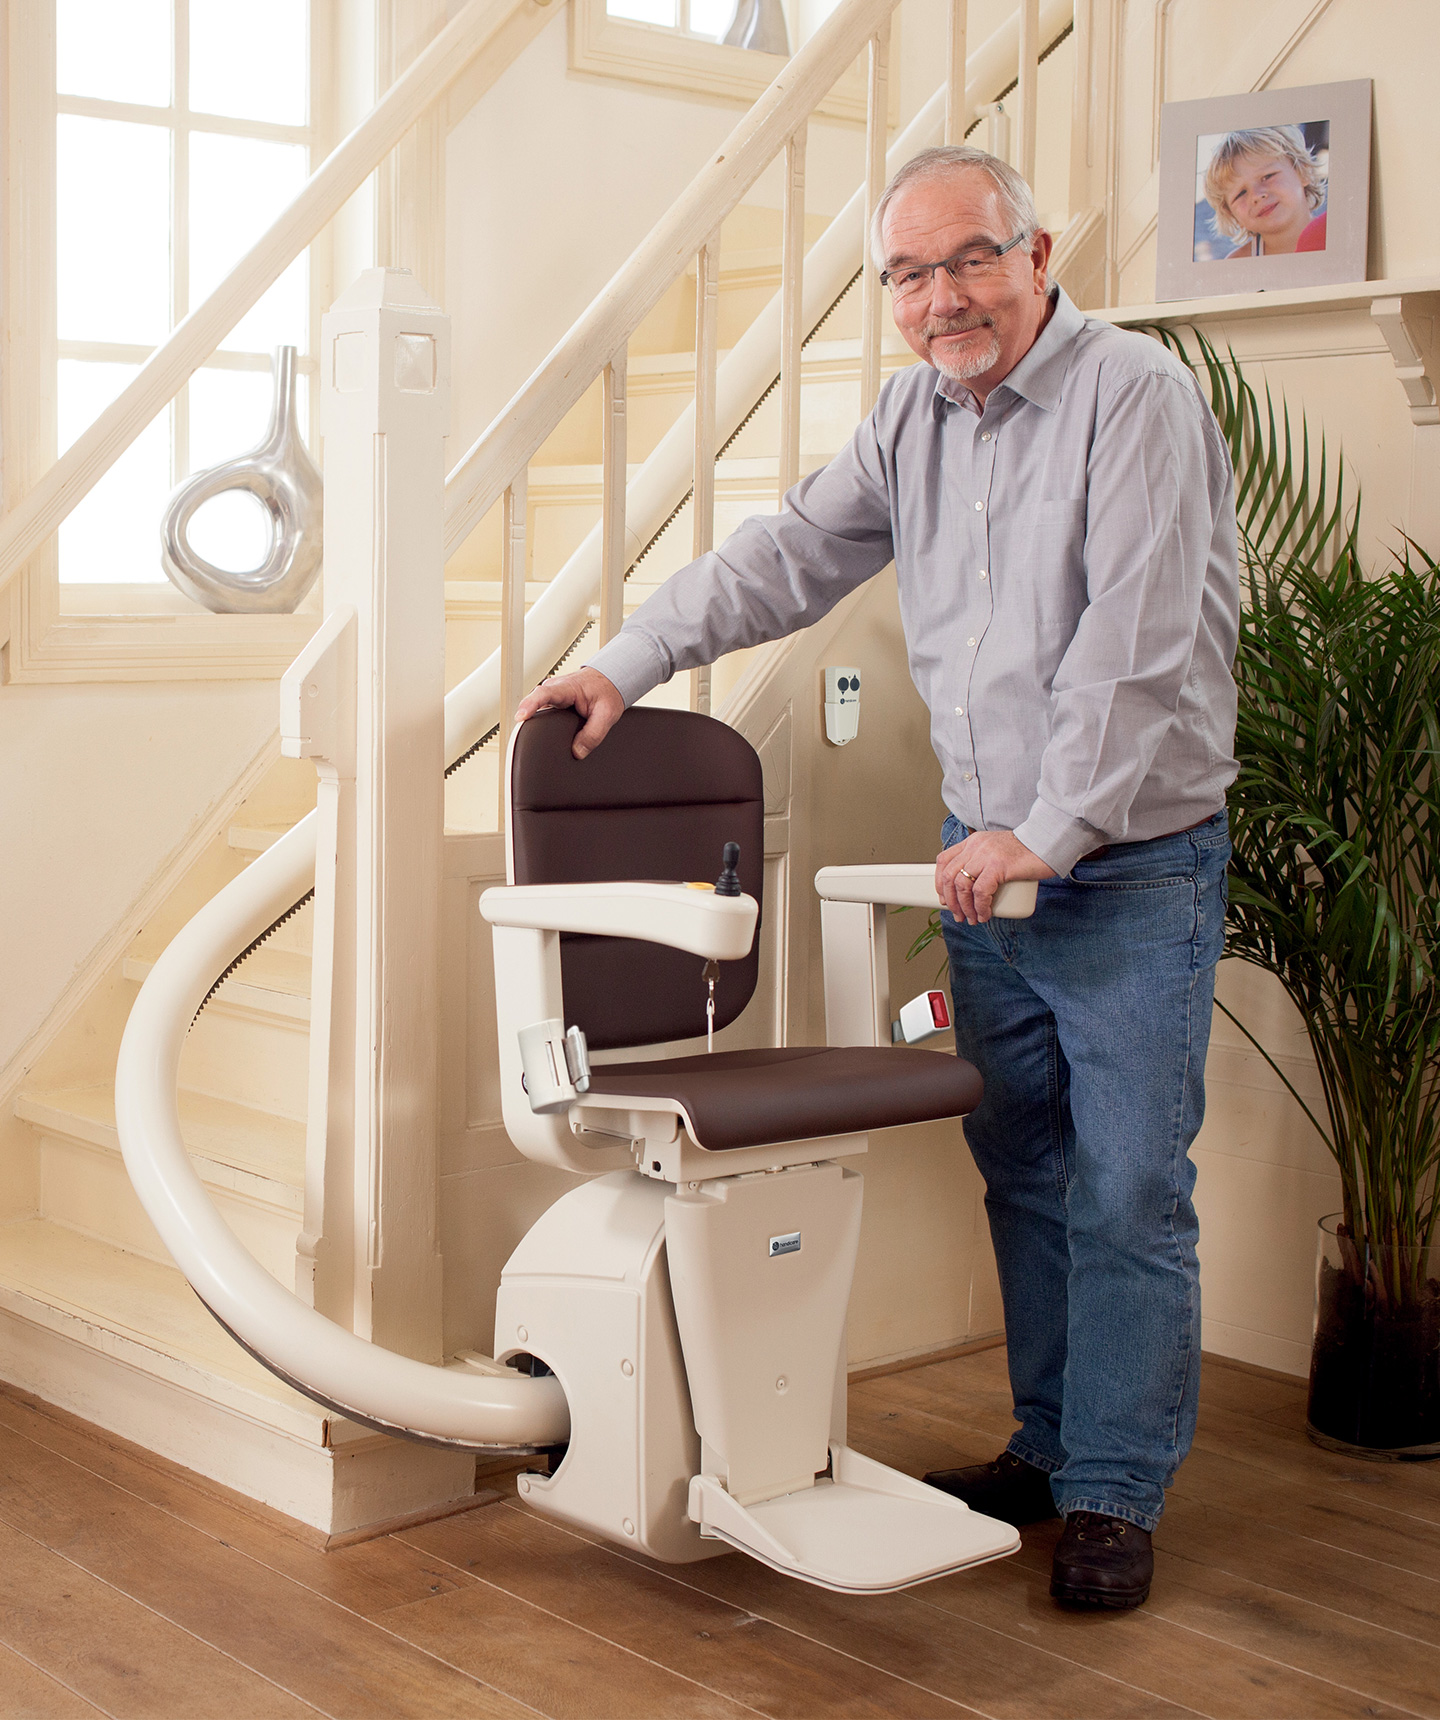 Handicare Freecurve curved stairlift